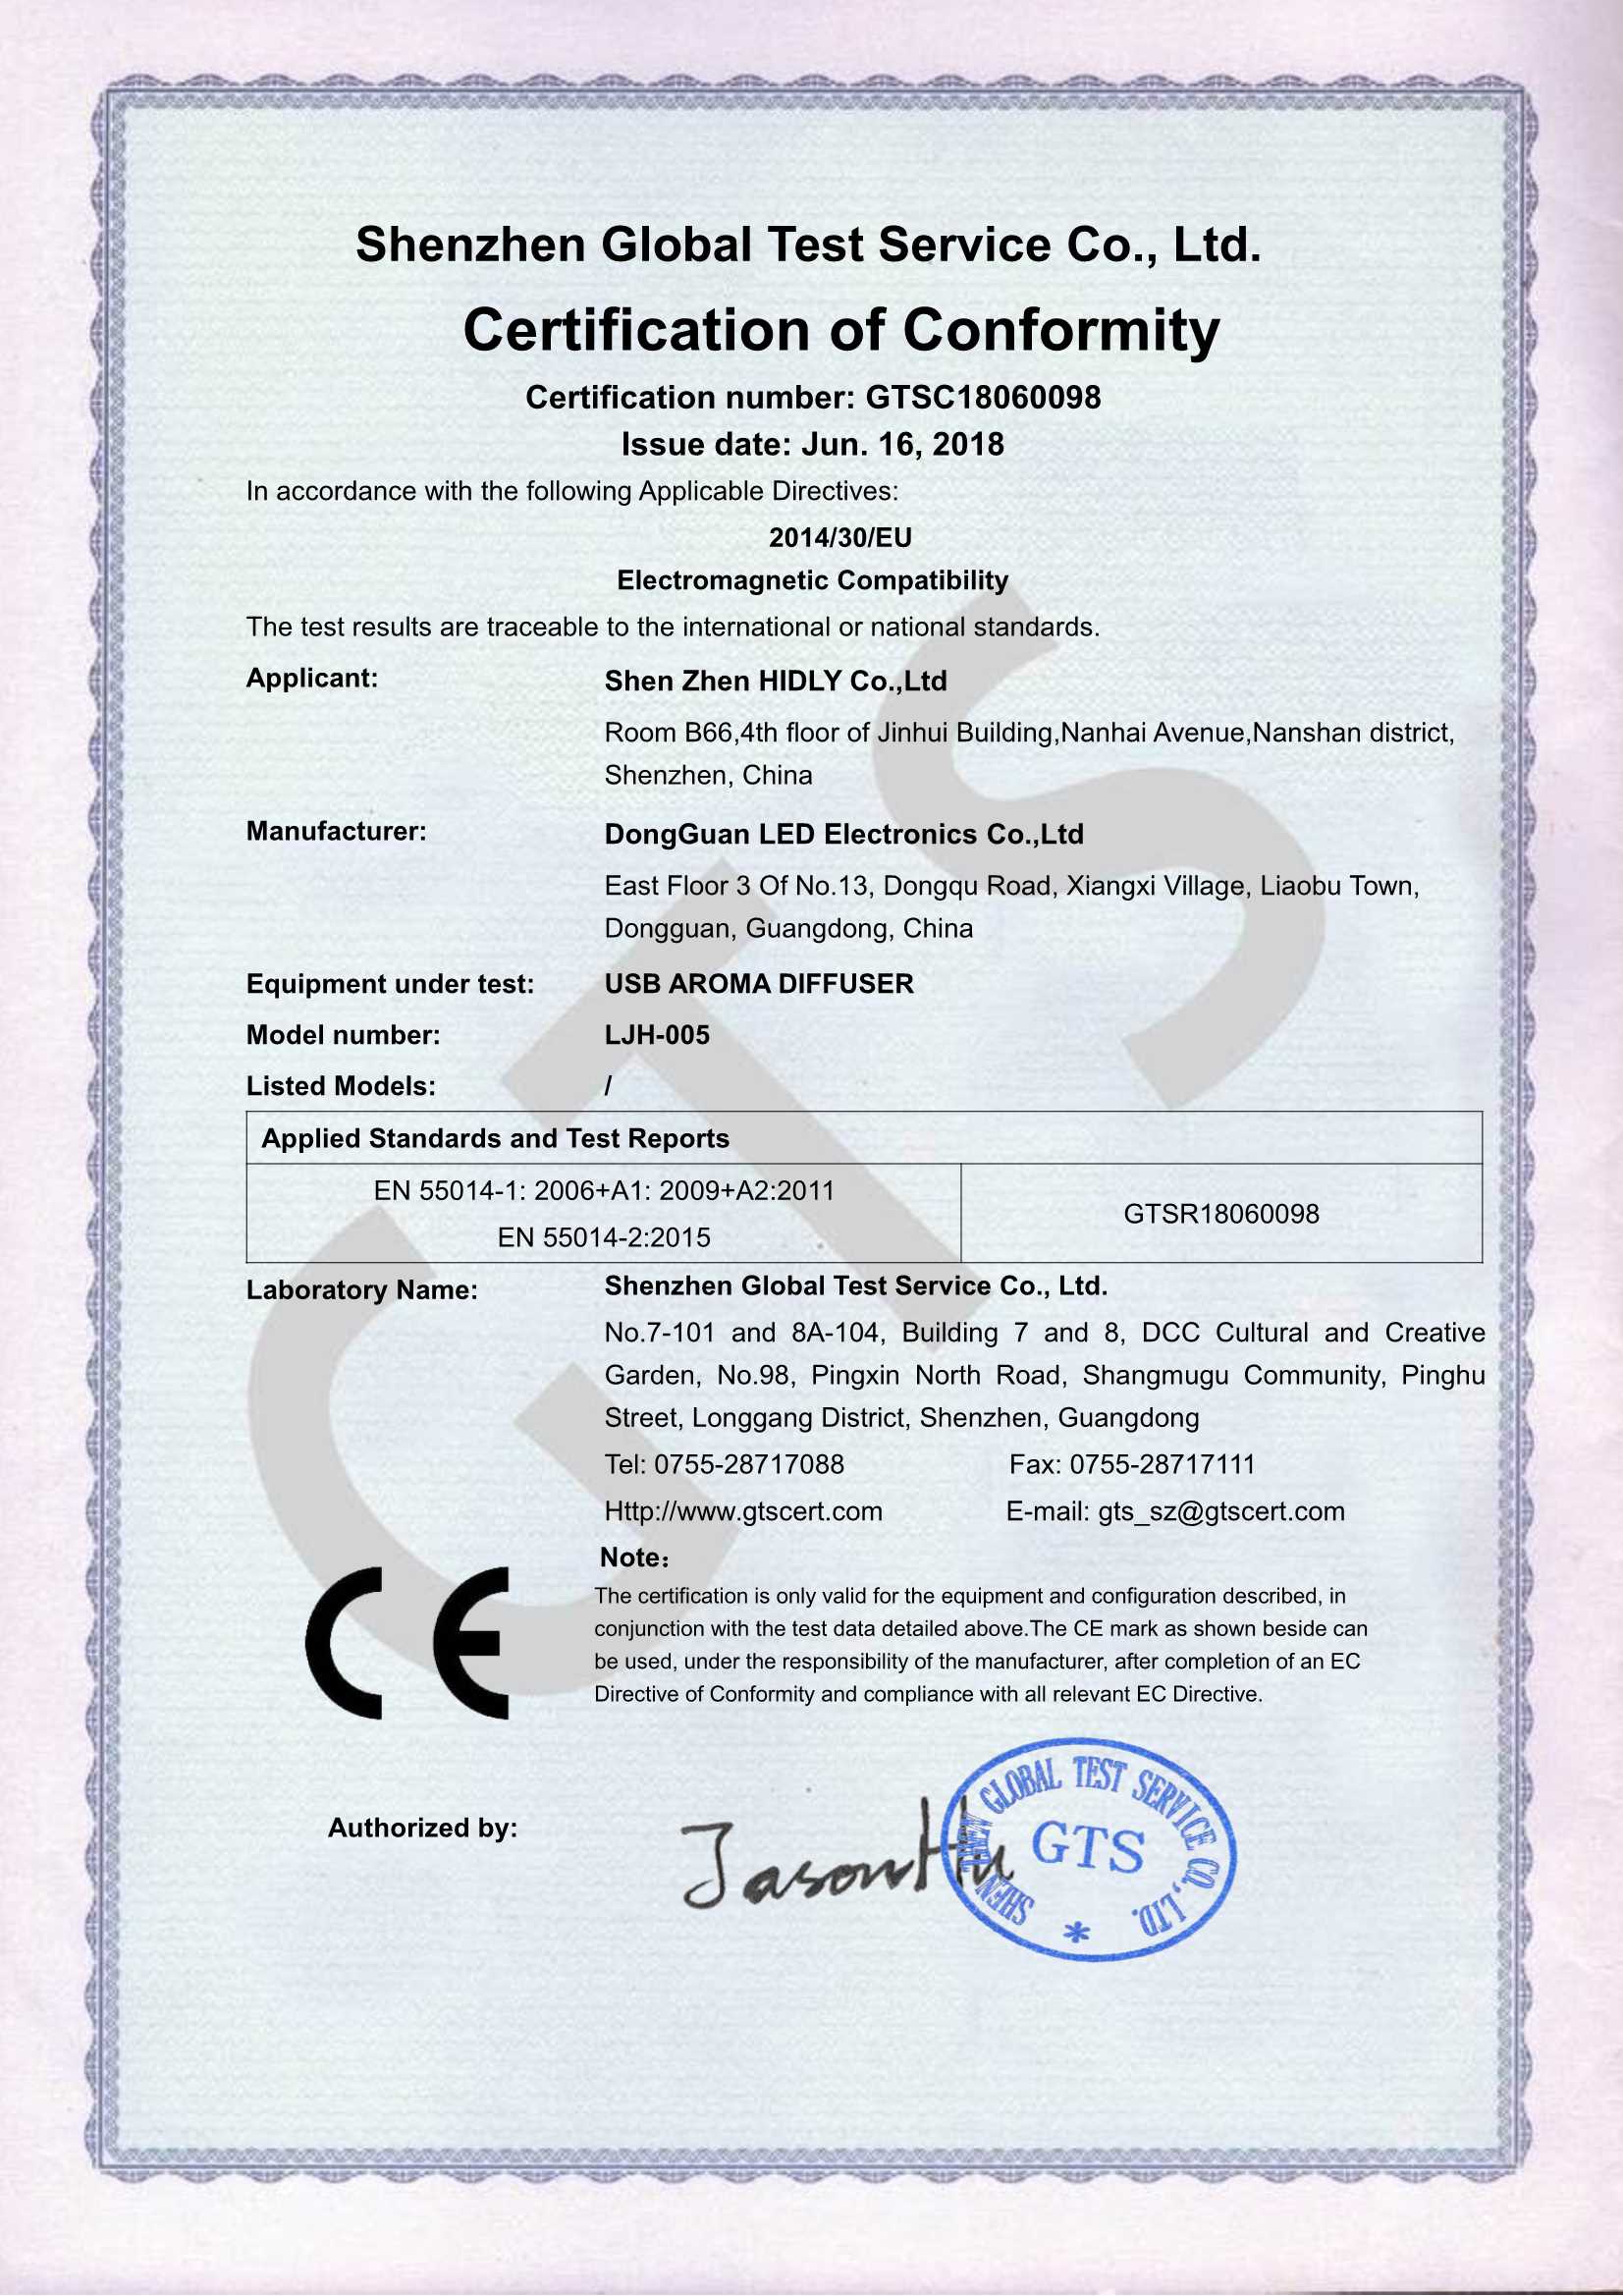 Our aroma humidifier(LJH005)have acquired CE-EMC Certifications